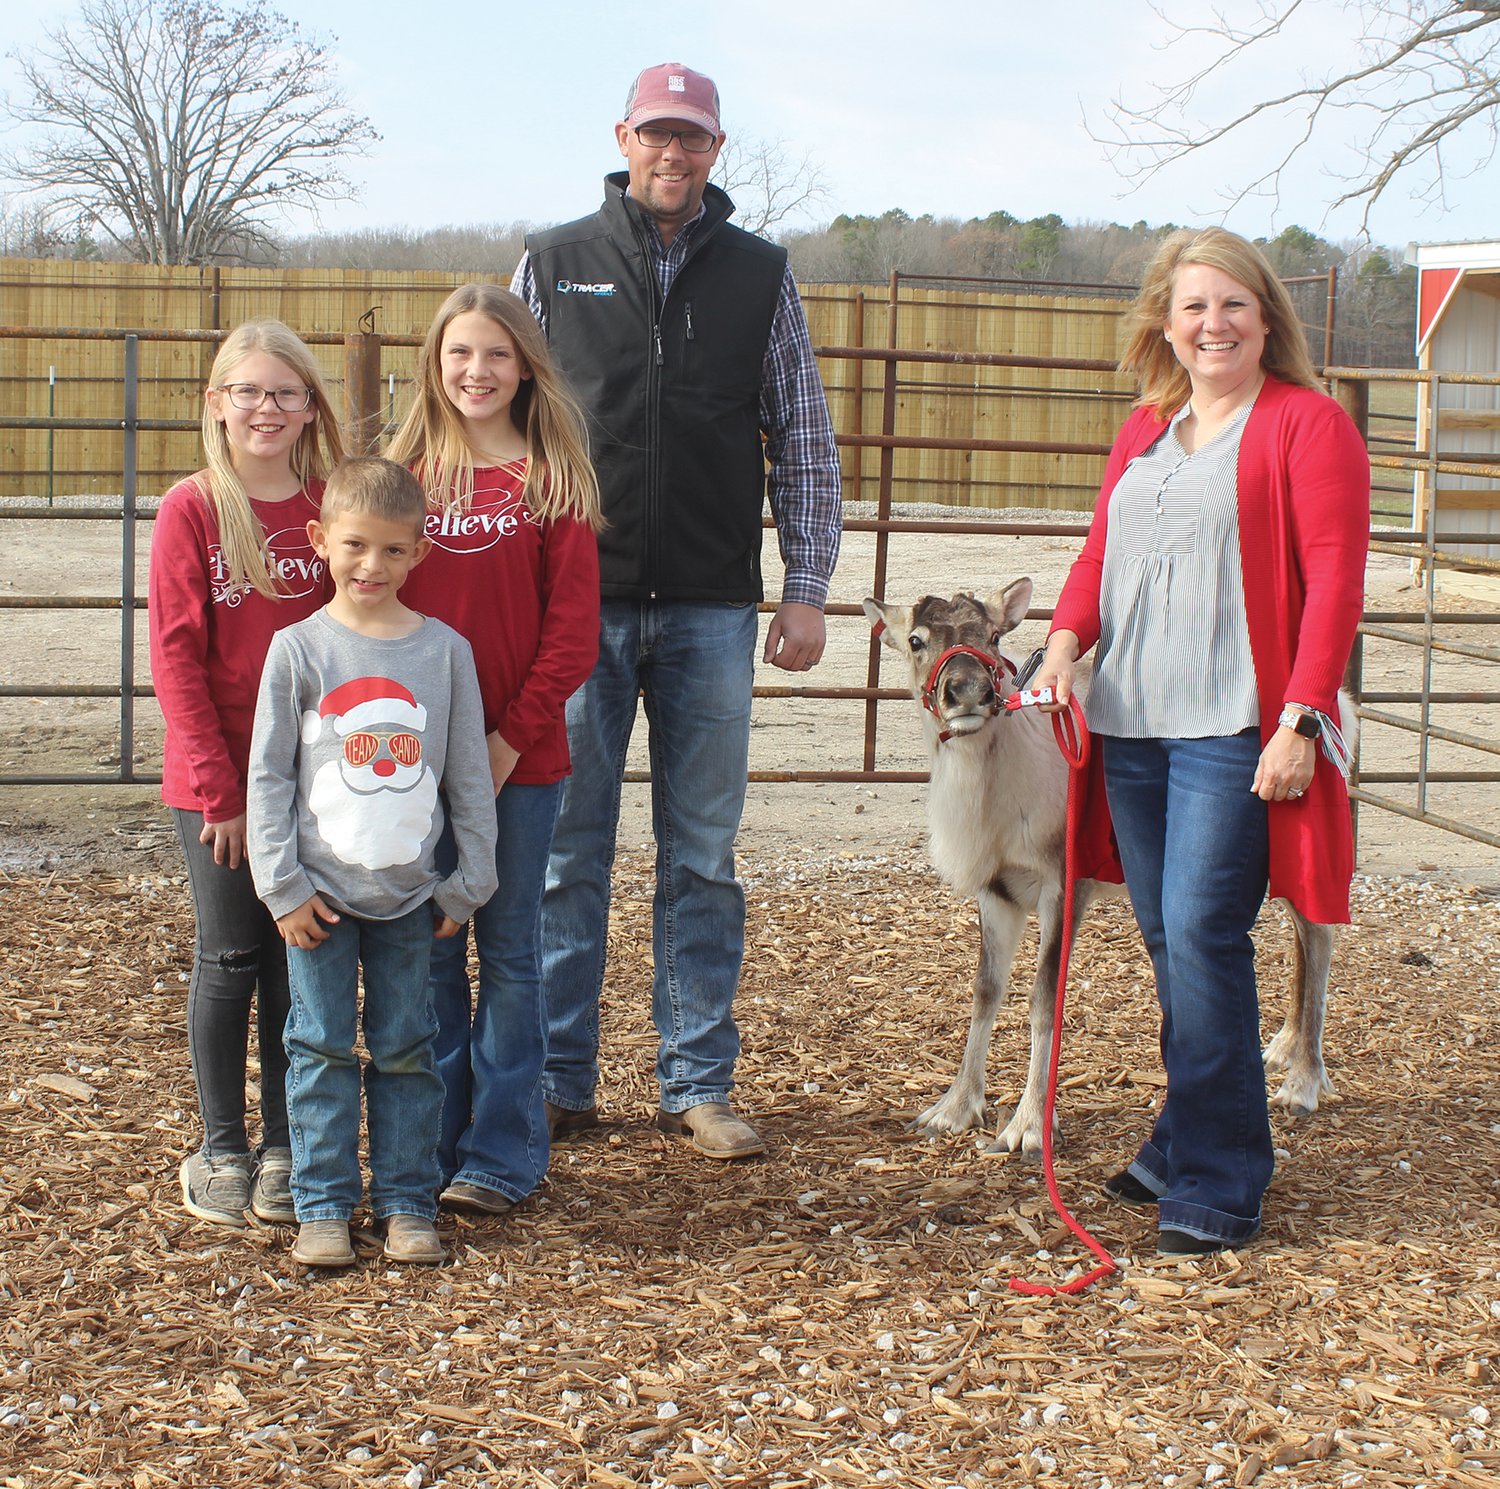 “Noel” the reindeer is joined by the Prescott family for a photo at the Holly Jolly Reindeer Ranch. Michael and Sara Prescott are joined by their children Madision, 13; Emma, 10; and Carter, 6.